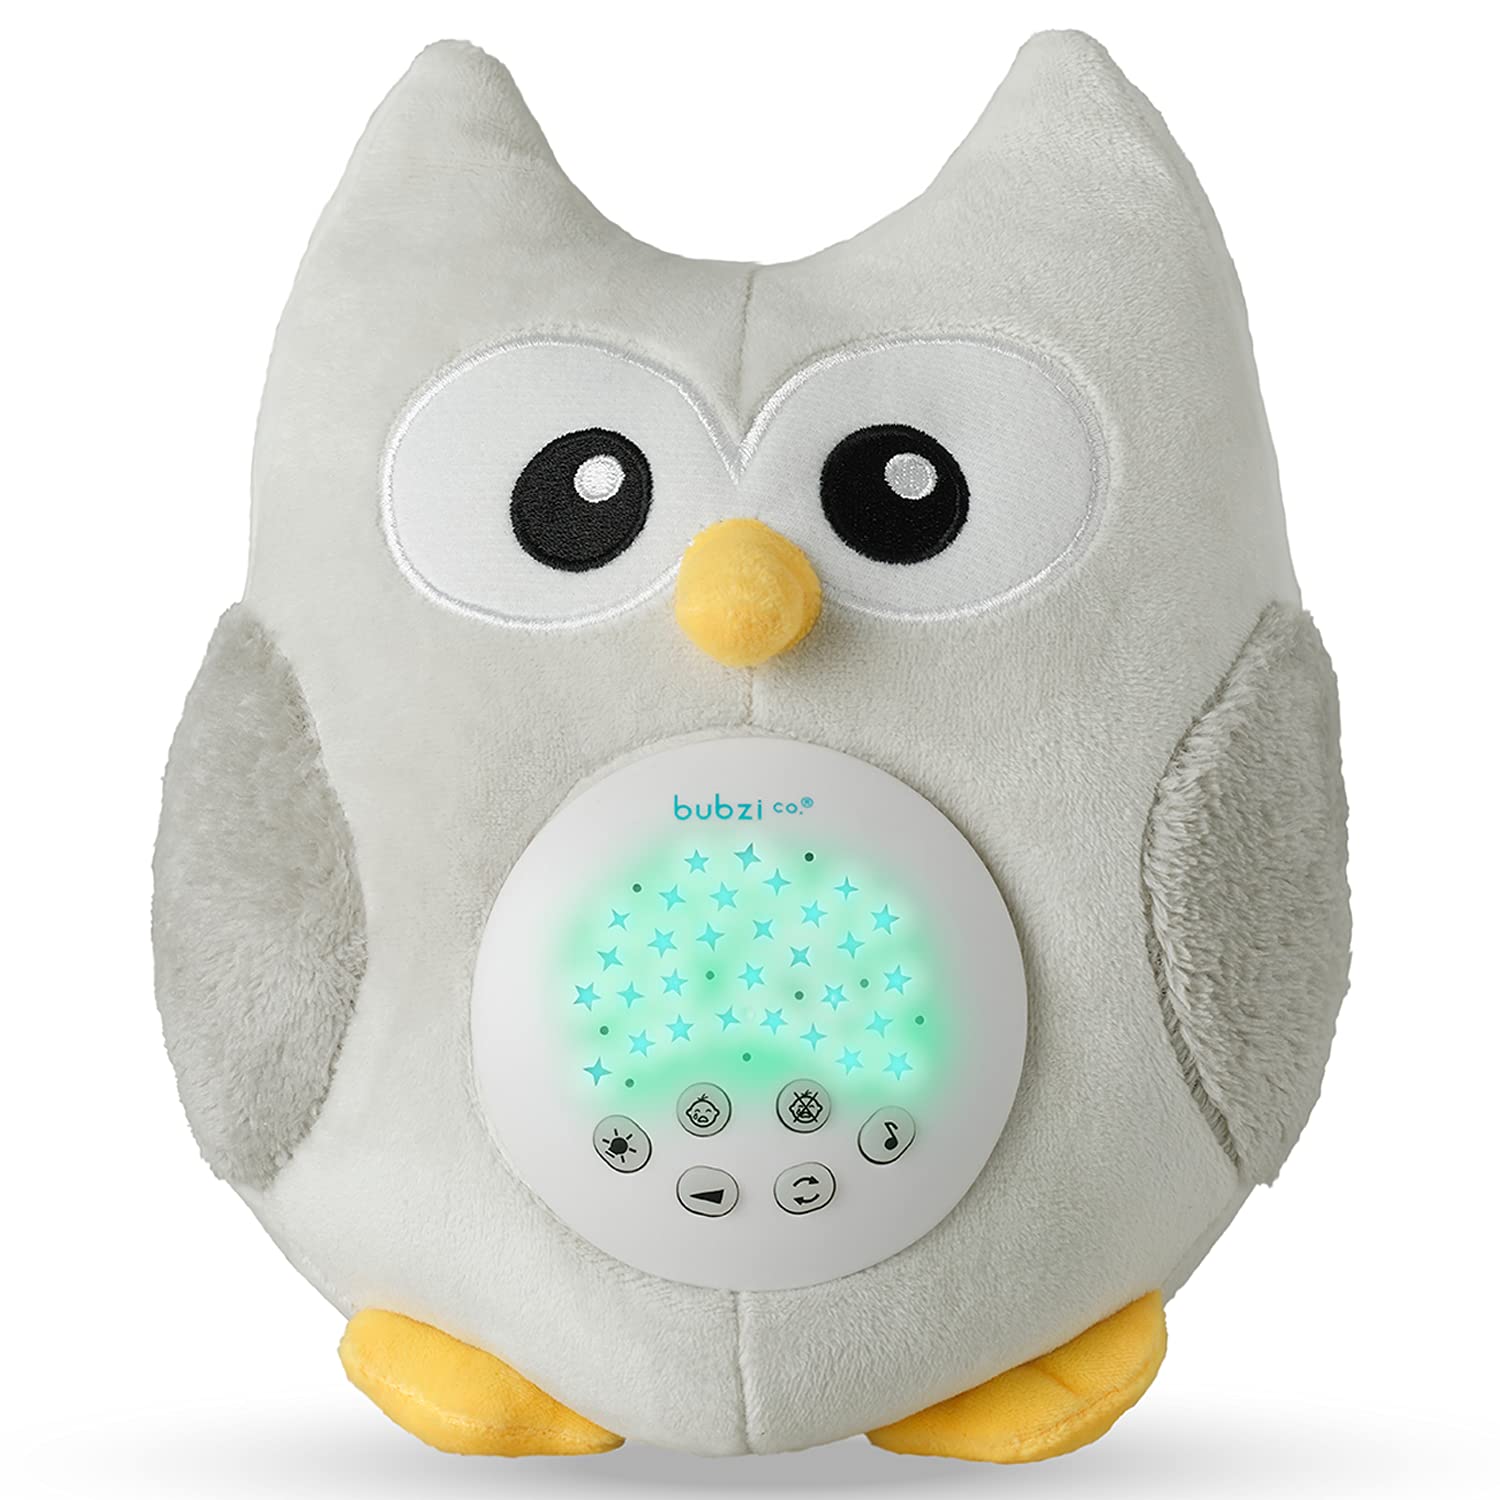 Bubzi Co Baby Soother cry Activated Sensor Toys Owl White Noise Sound Machine, Toddler Sleep Aid Night Light, Unique Baby girl & Baby Boy